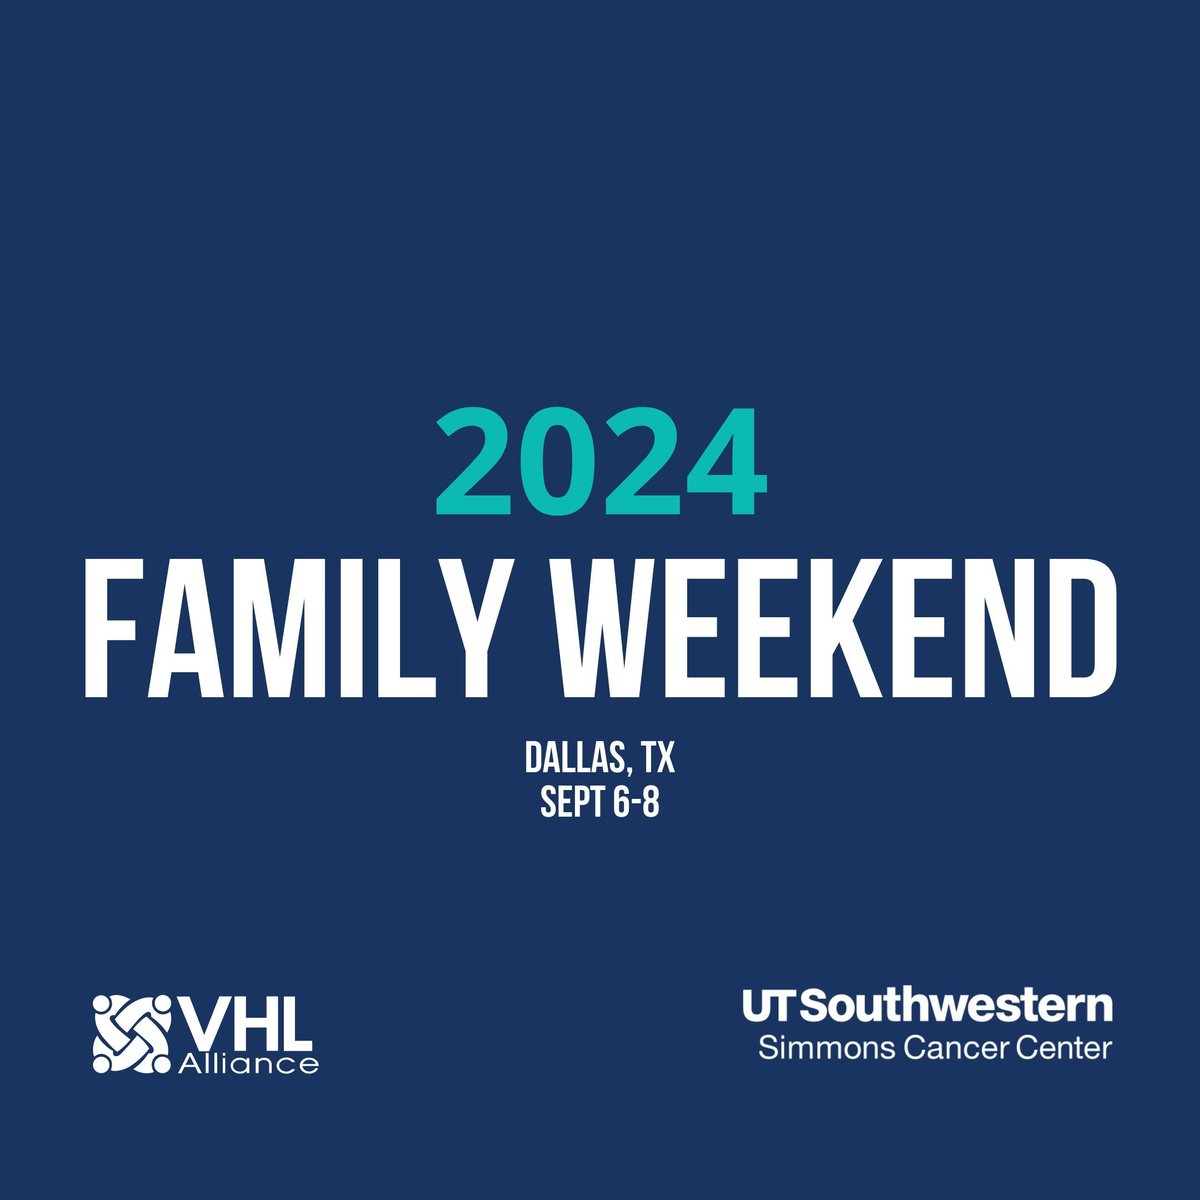 Mark your calendars! 🗓️ Family weekend is Sept 6-8 in Dallas! Immerse yourself in a community of strength as we come together to share our VHL experience, build lasting connections, and learn directly from VHL experts. Click here to register today: buff.ly/3uEu3pd